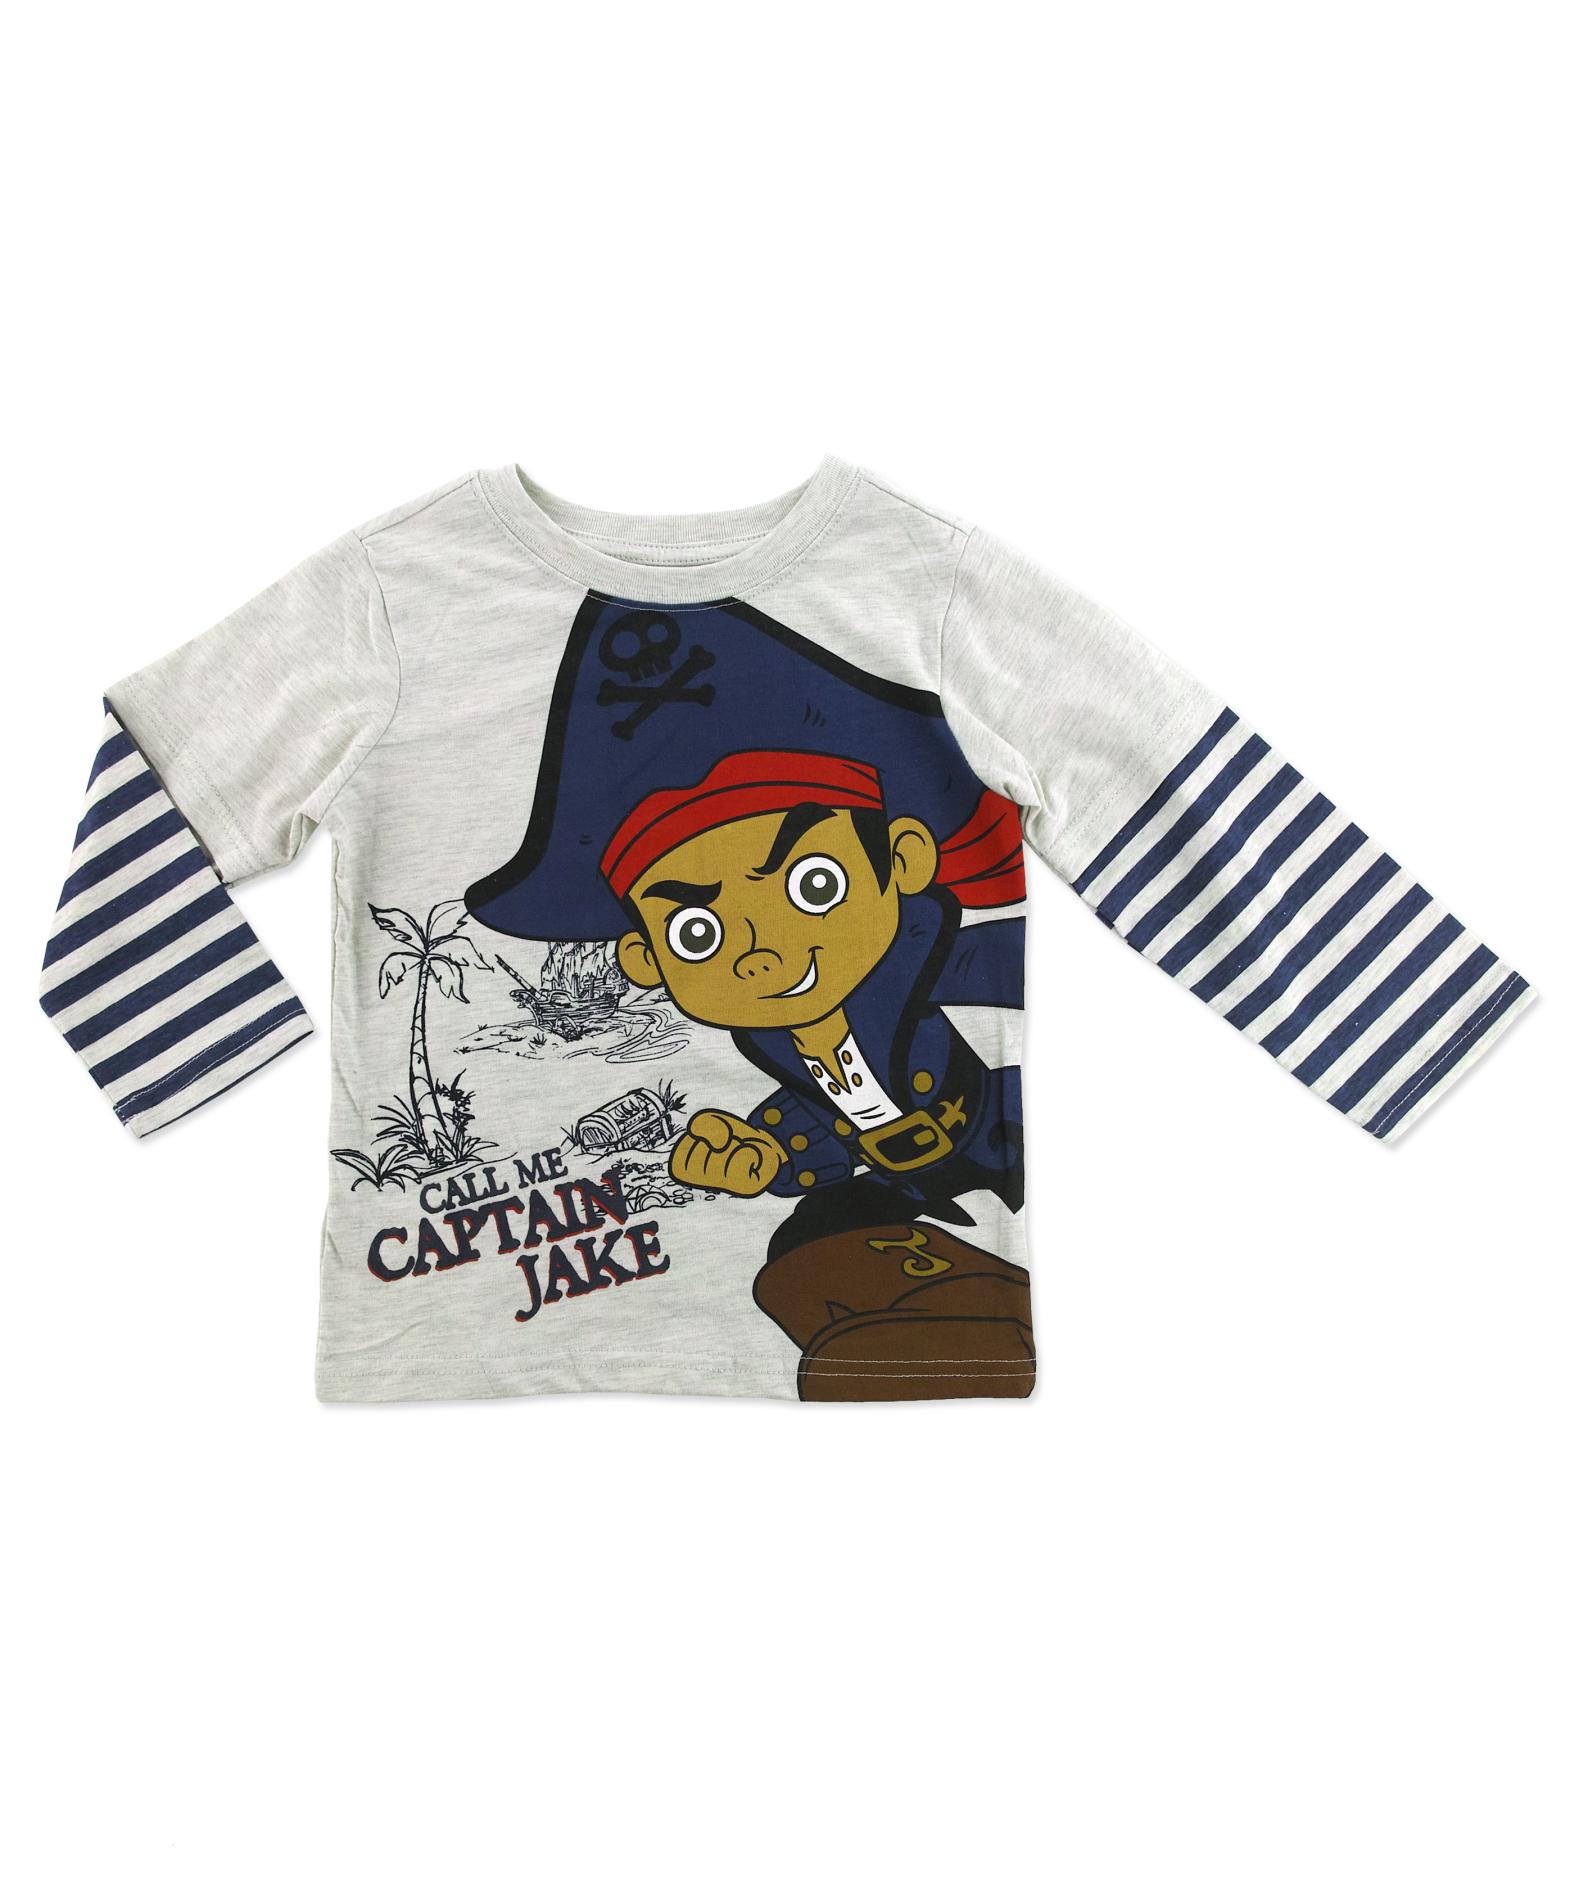 Disney Jake and the Never Land Pirates Toddler Boy's Layered Look Shirt